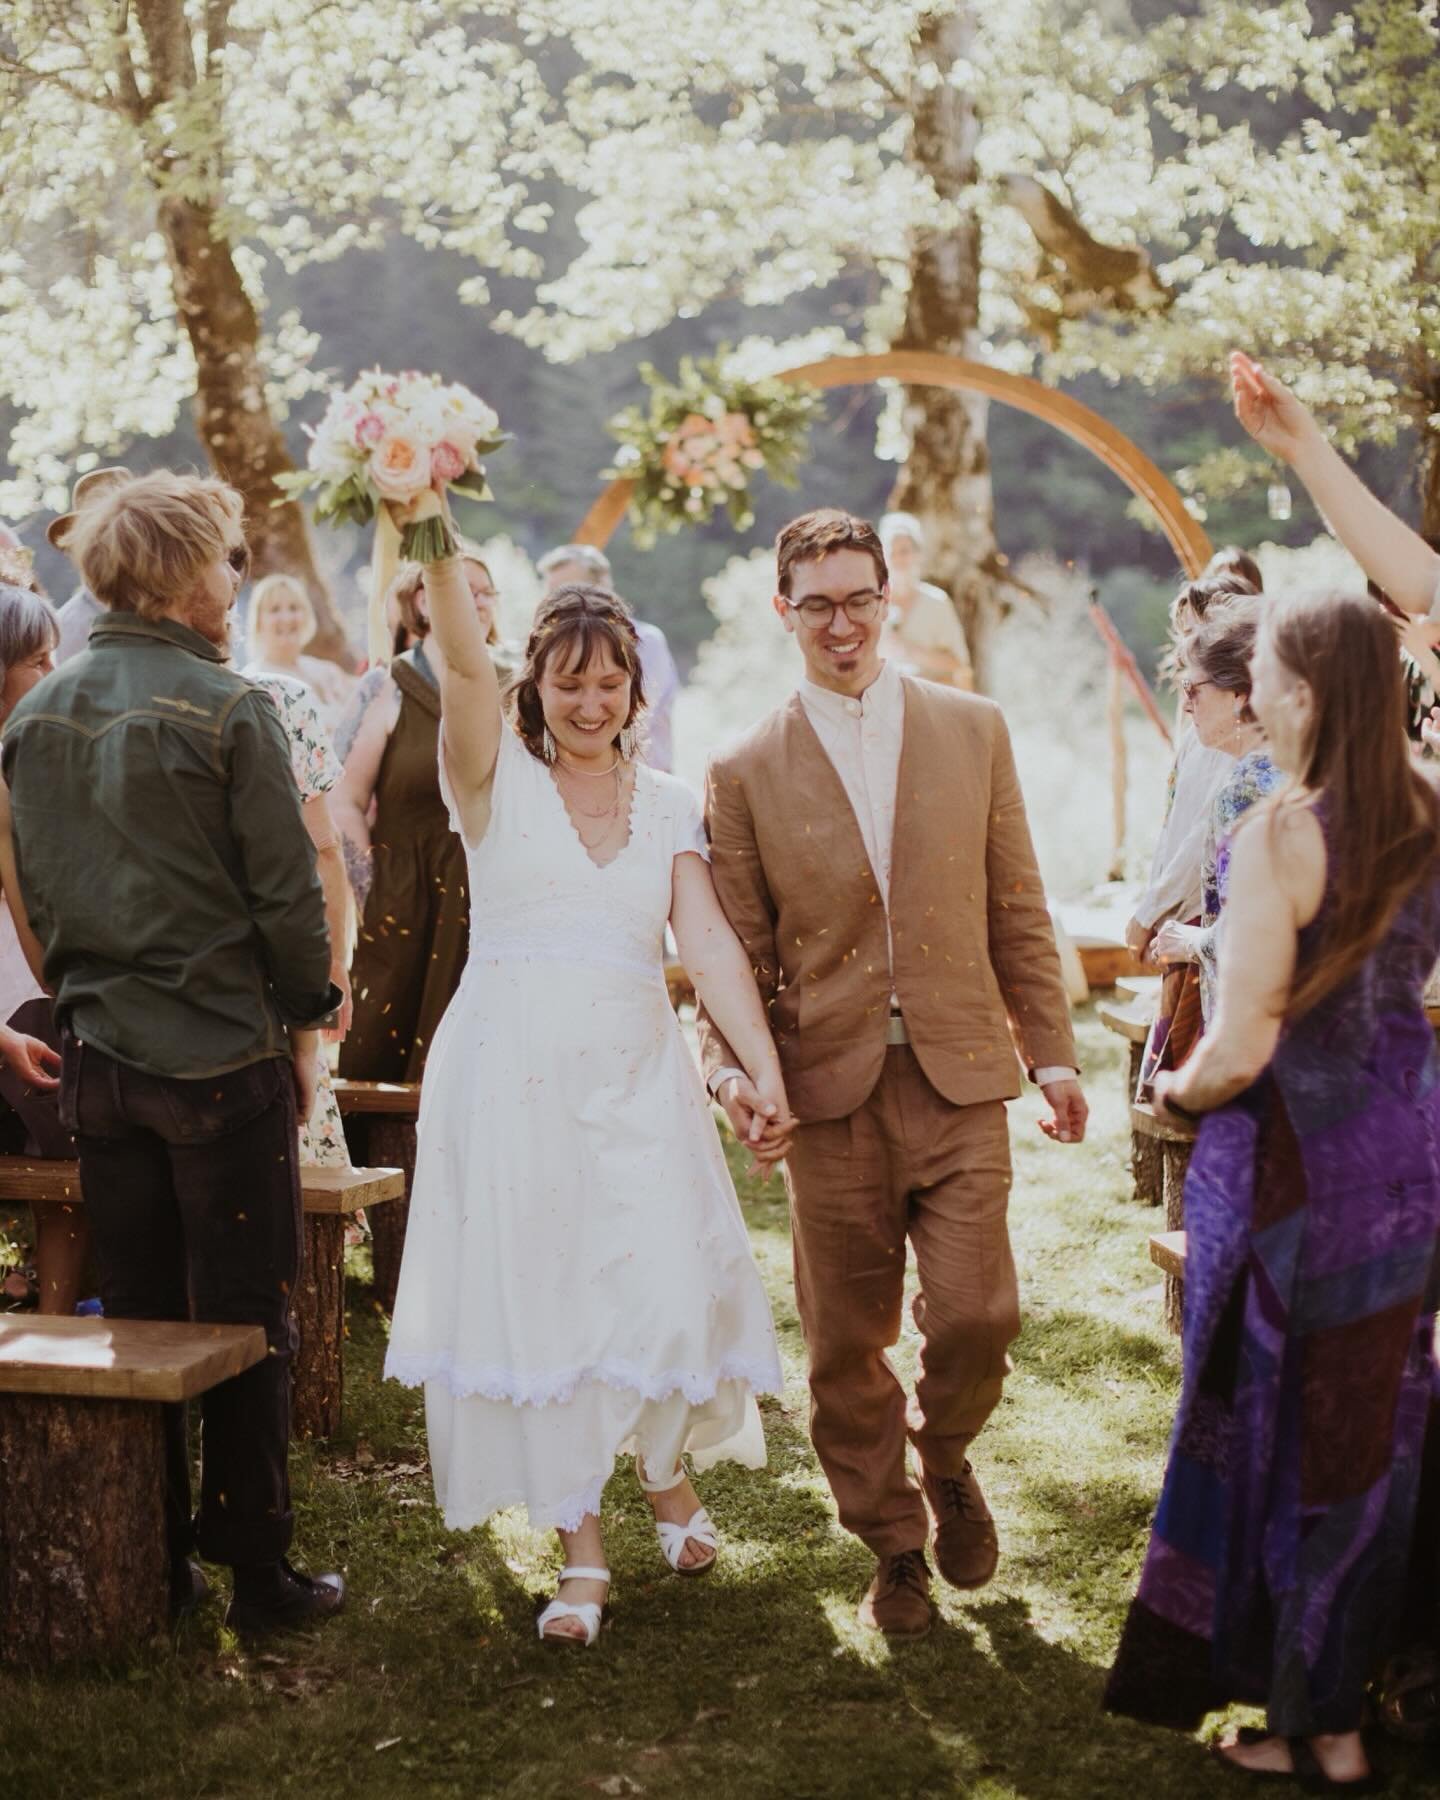 3/3 Wishing these loves many more years of love light and joy! Thank you again for having me at your side 🖤🖤🖤
.
@cedarbloomfarm 
@singinglarksfarm 
@lilysandhornsphoto